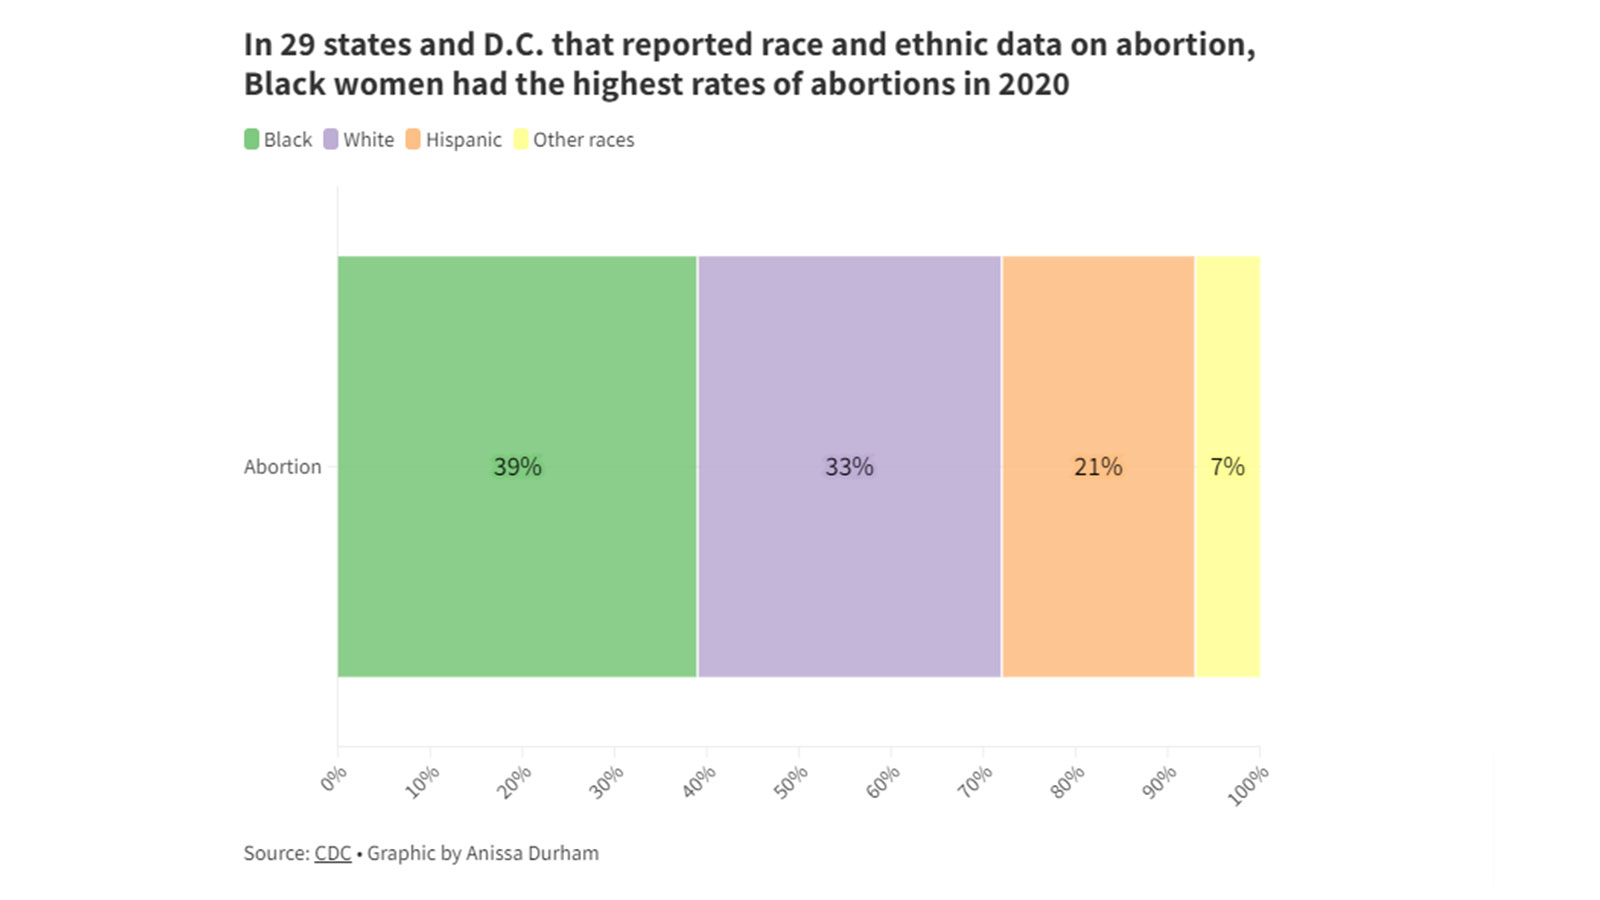 In 29 states and D.C. that reported race and ethnic data on abortion, Black women had the highest rates of abortions in 2020. Source: CDC